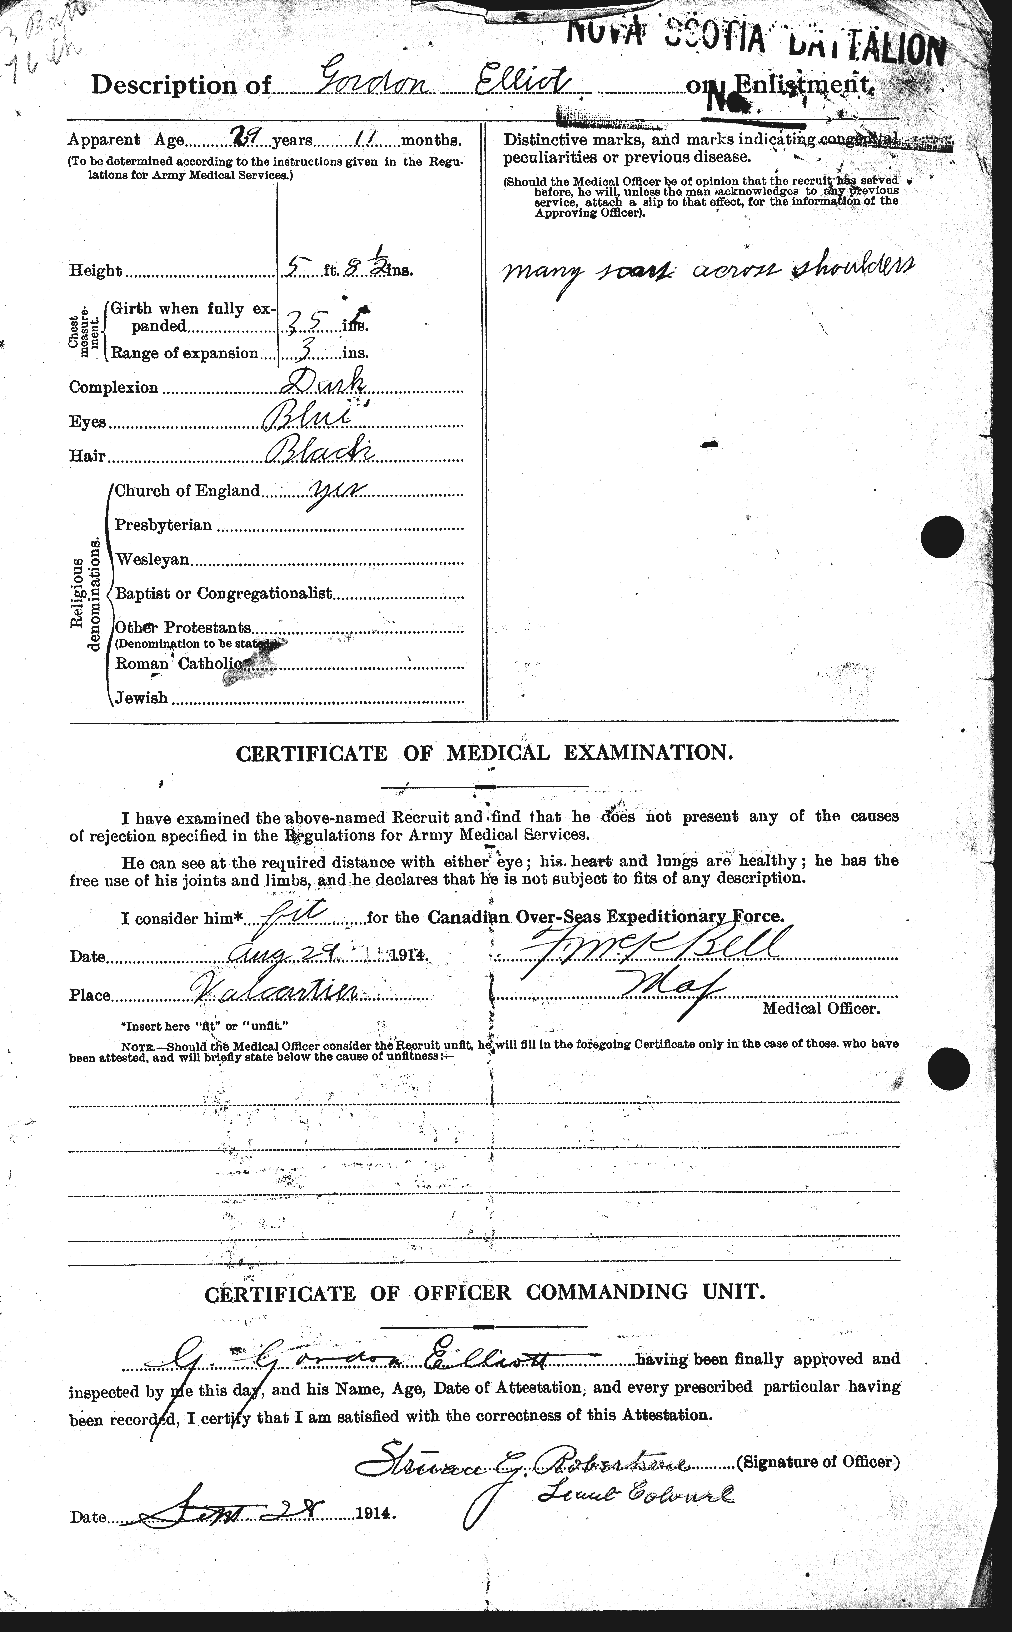 Personnel Records of the First World War - CEF 387128b